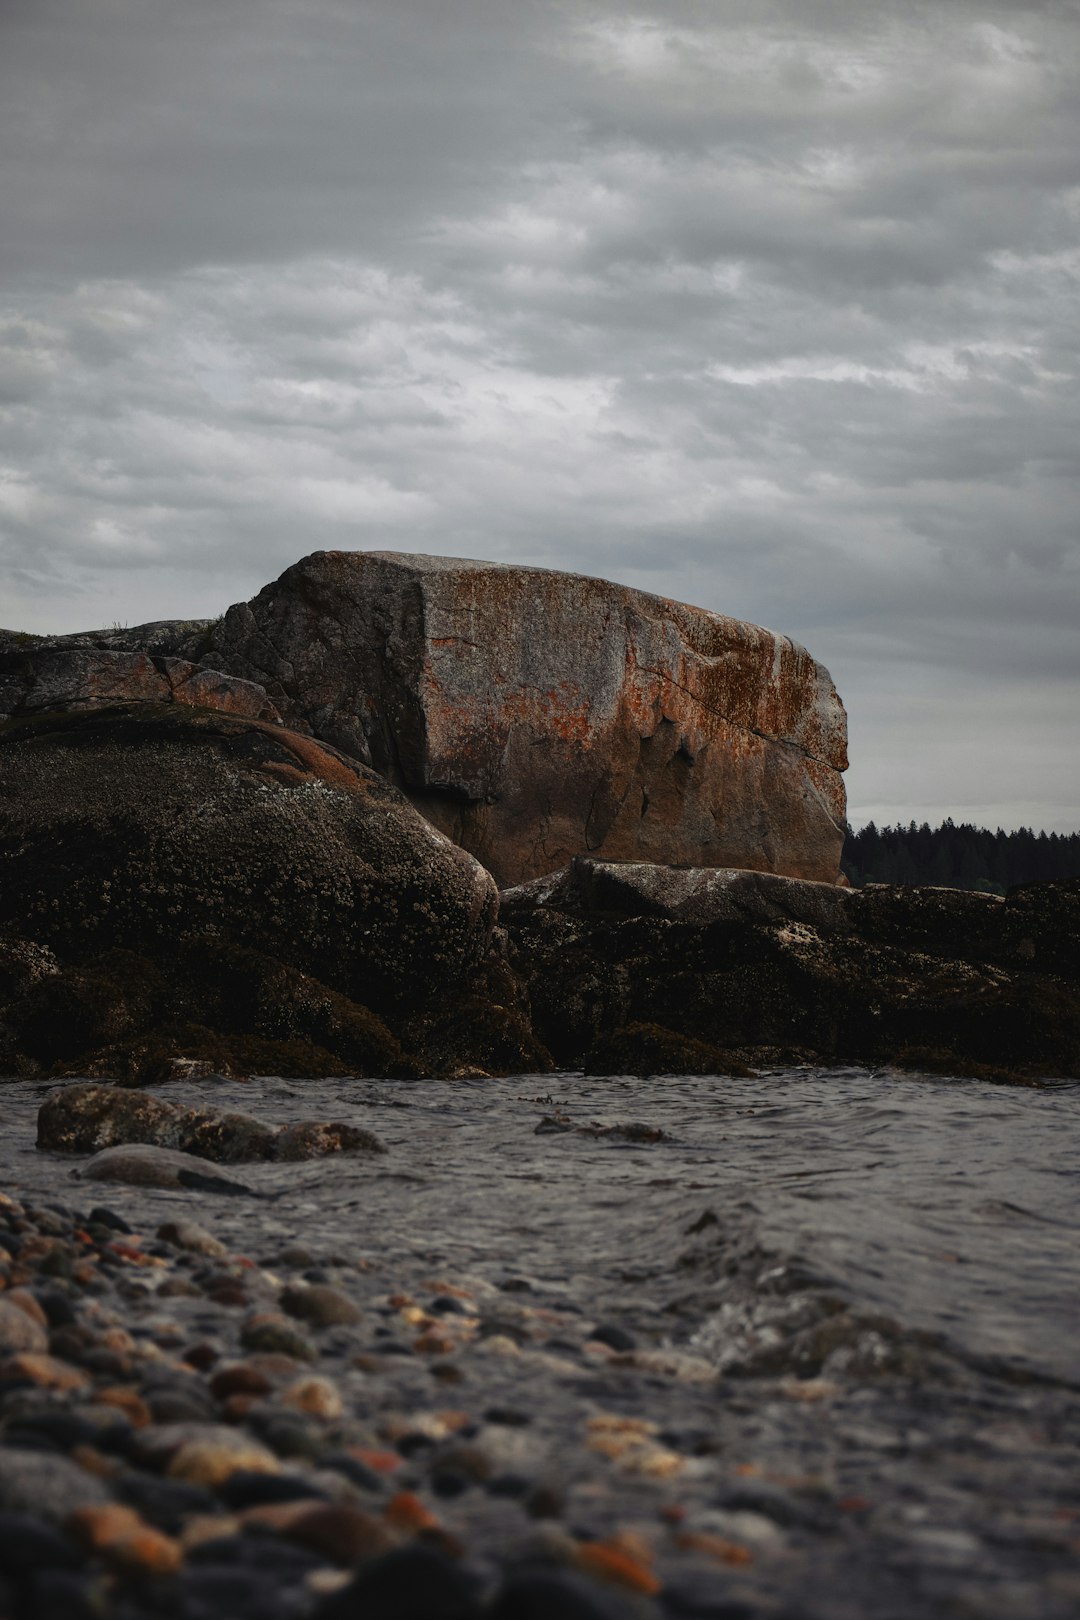 brown rock formation on body of water under cloudy sky during daytime